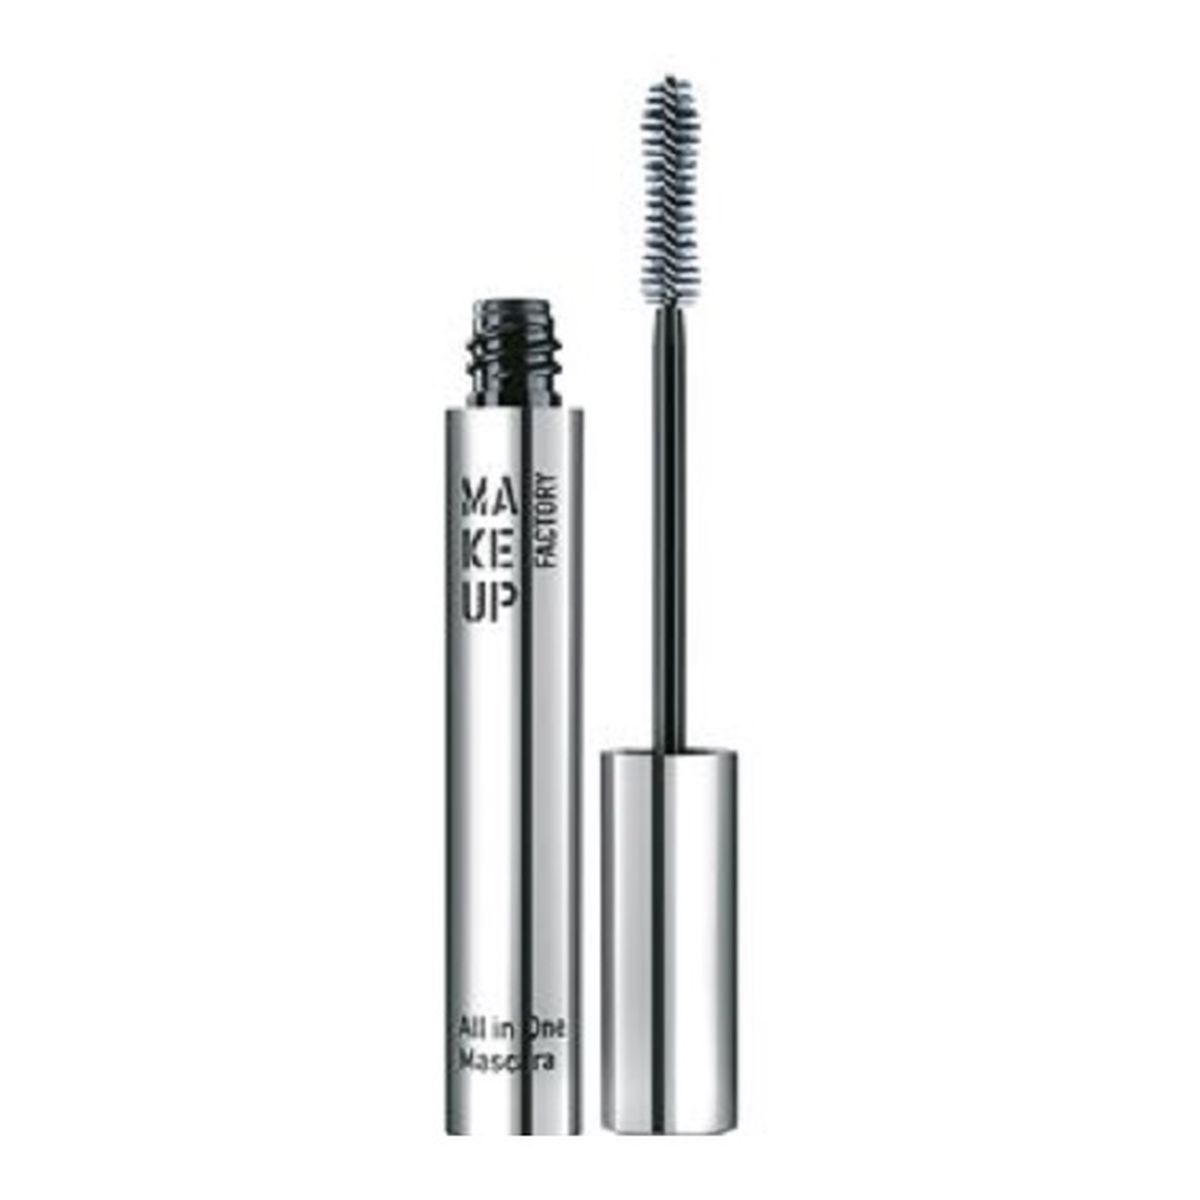 Make Up Factory All In One Mascara Tusz do rzęs 9ml